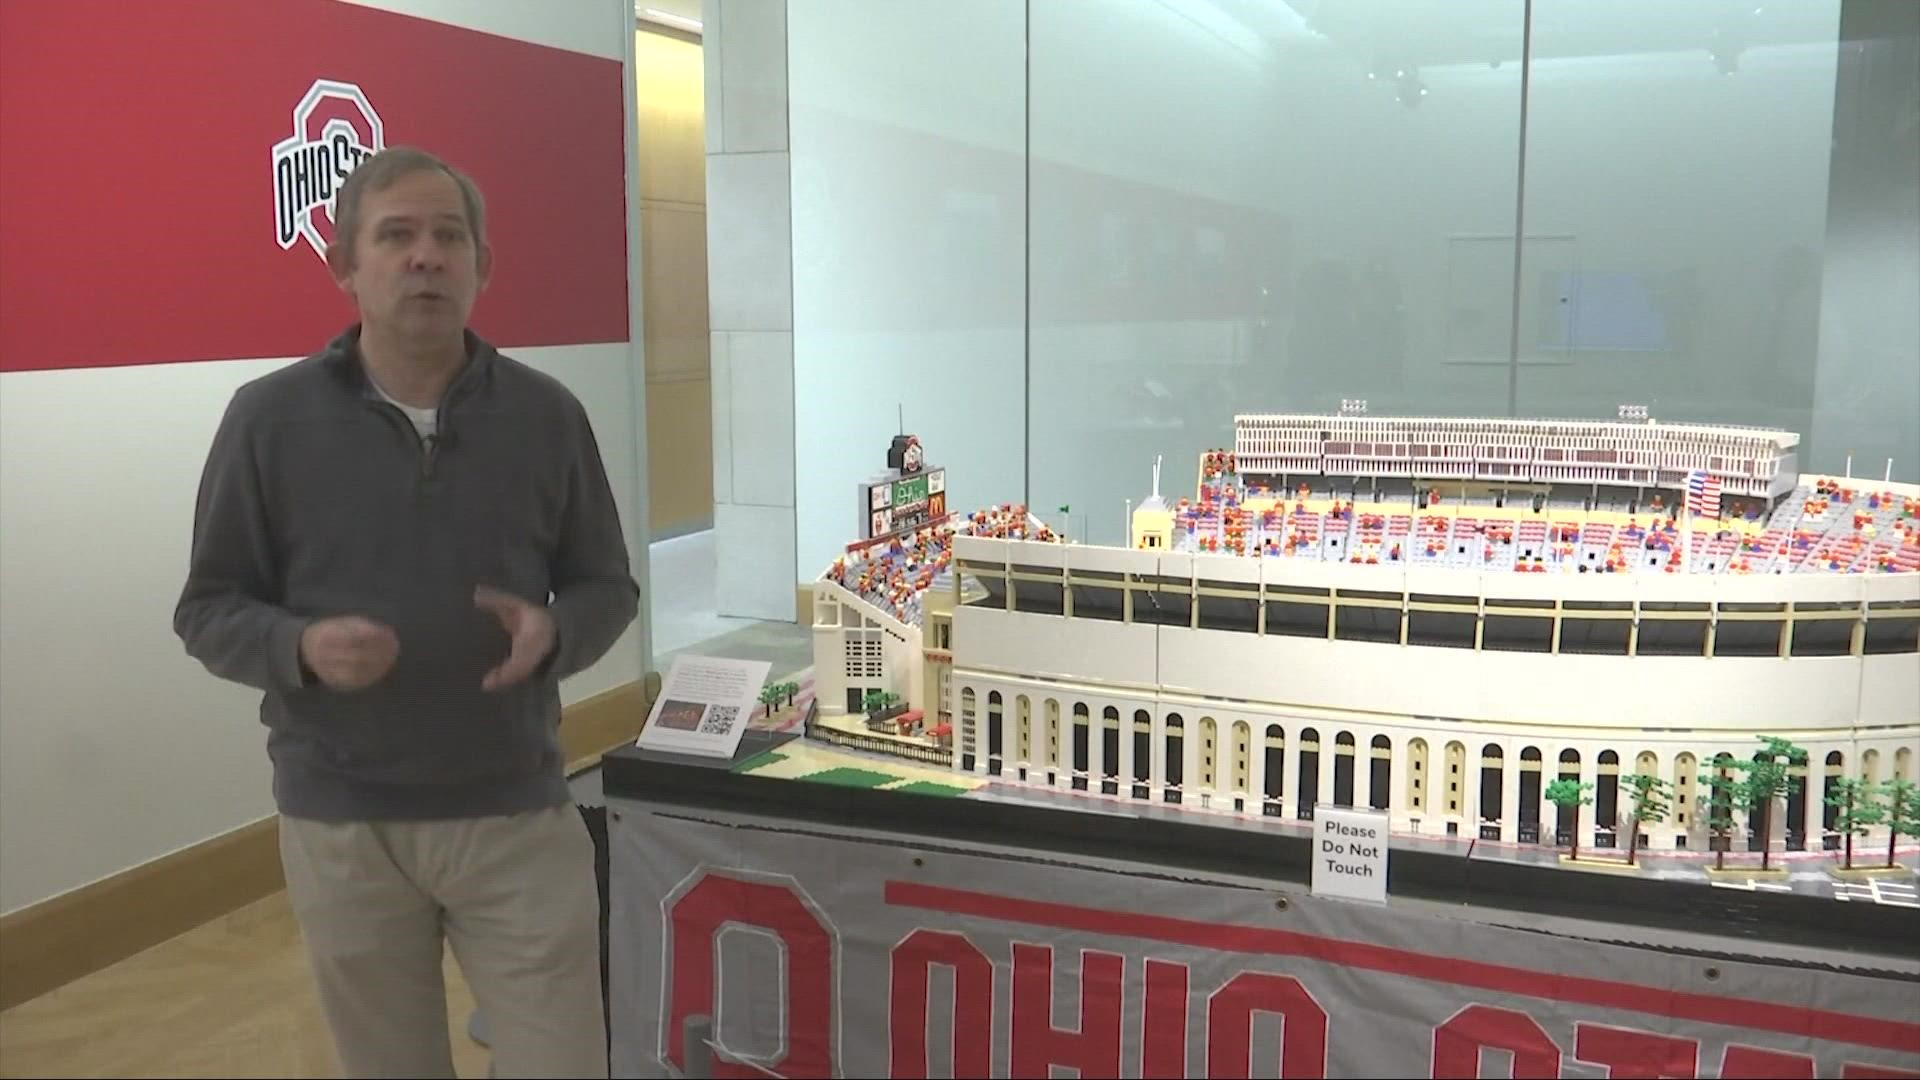 An Ohio State University professor has built a LEGO replica of The Shoe ahead of OSU's football game against Michigan.